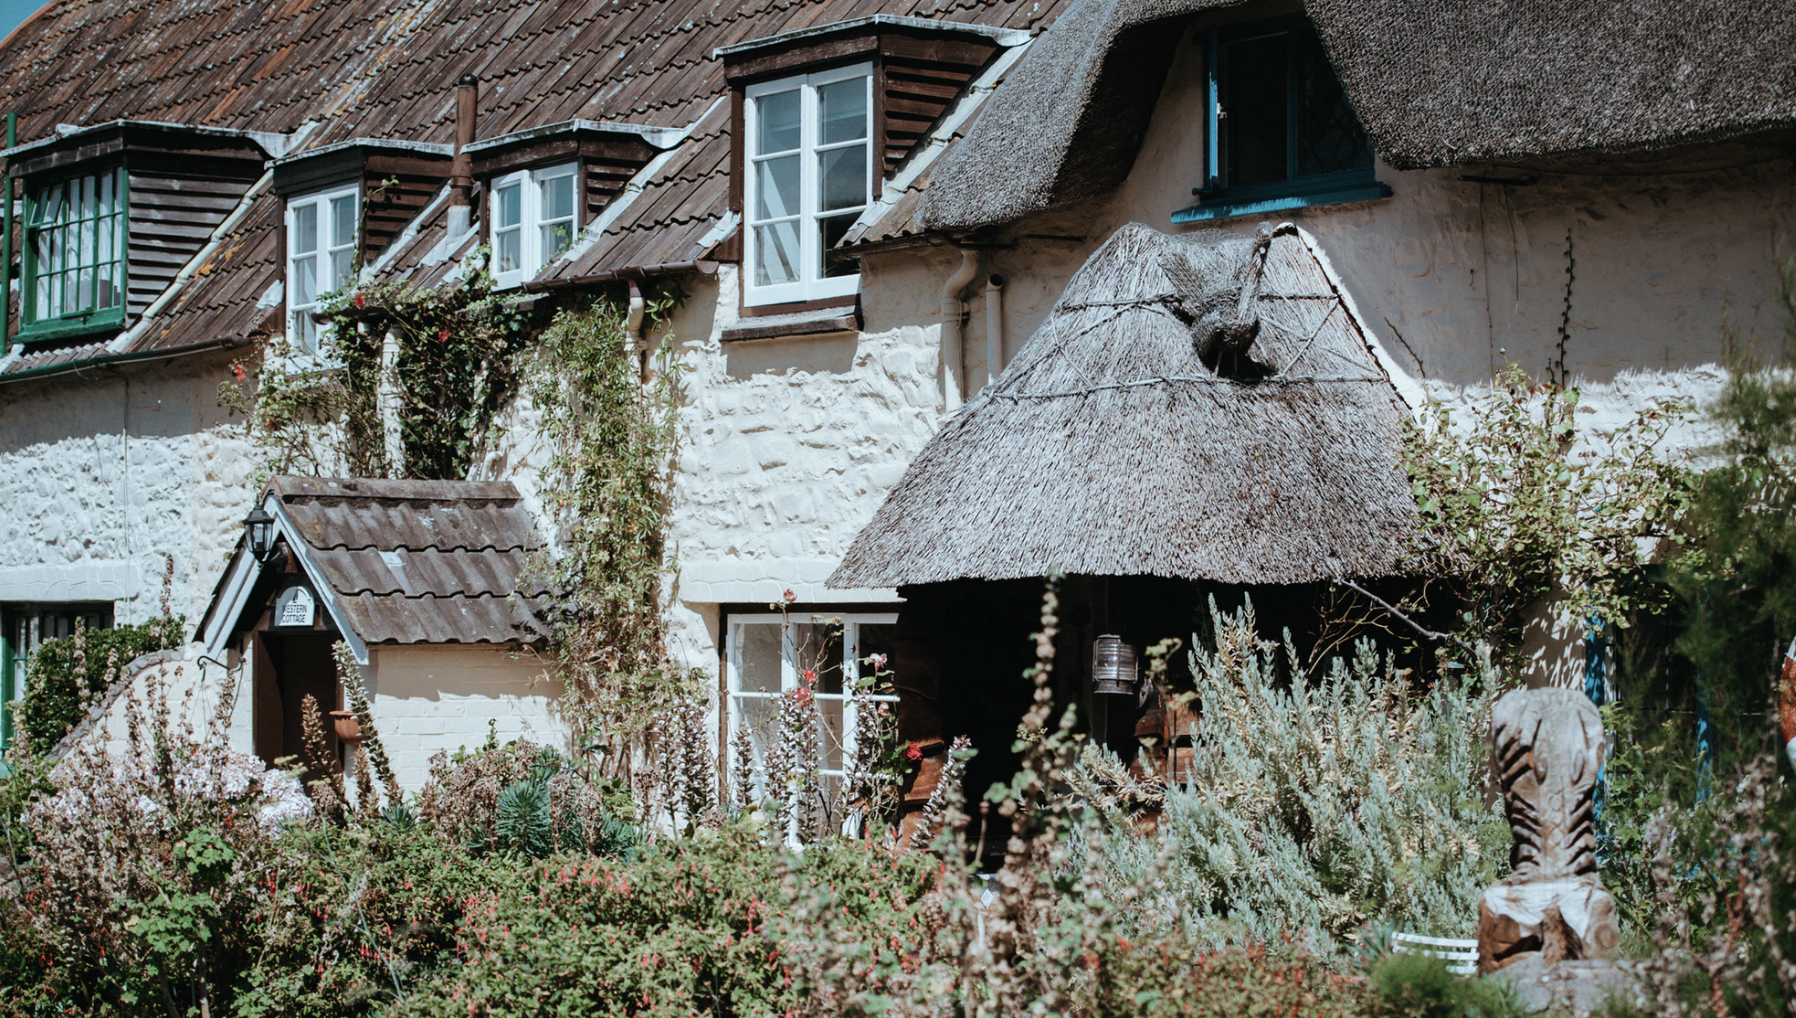 Thatched roof house, Somerset, United Kingdom.